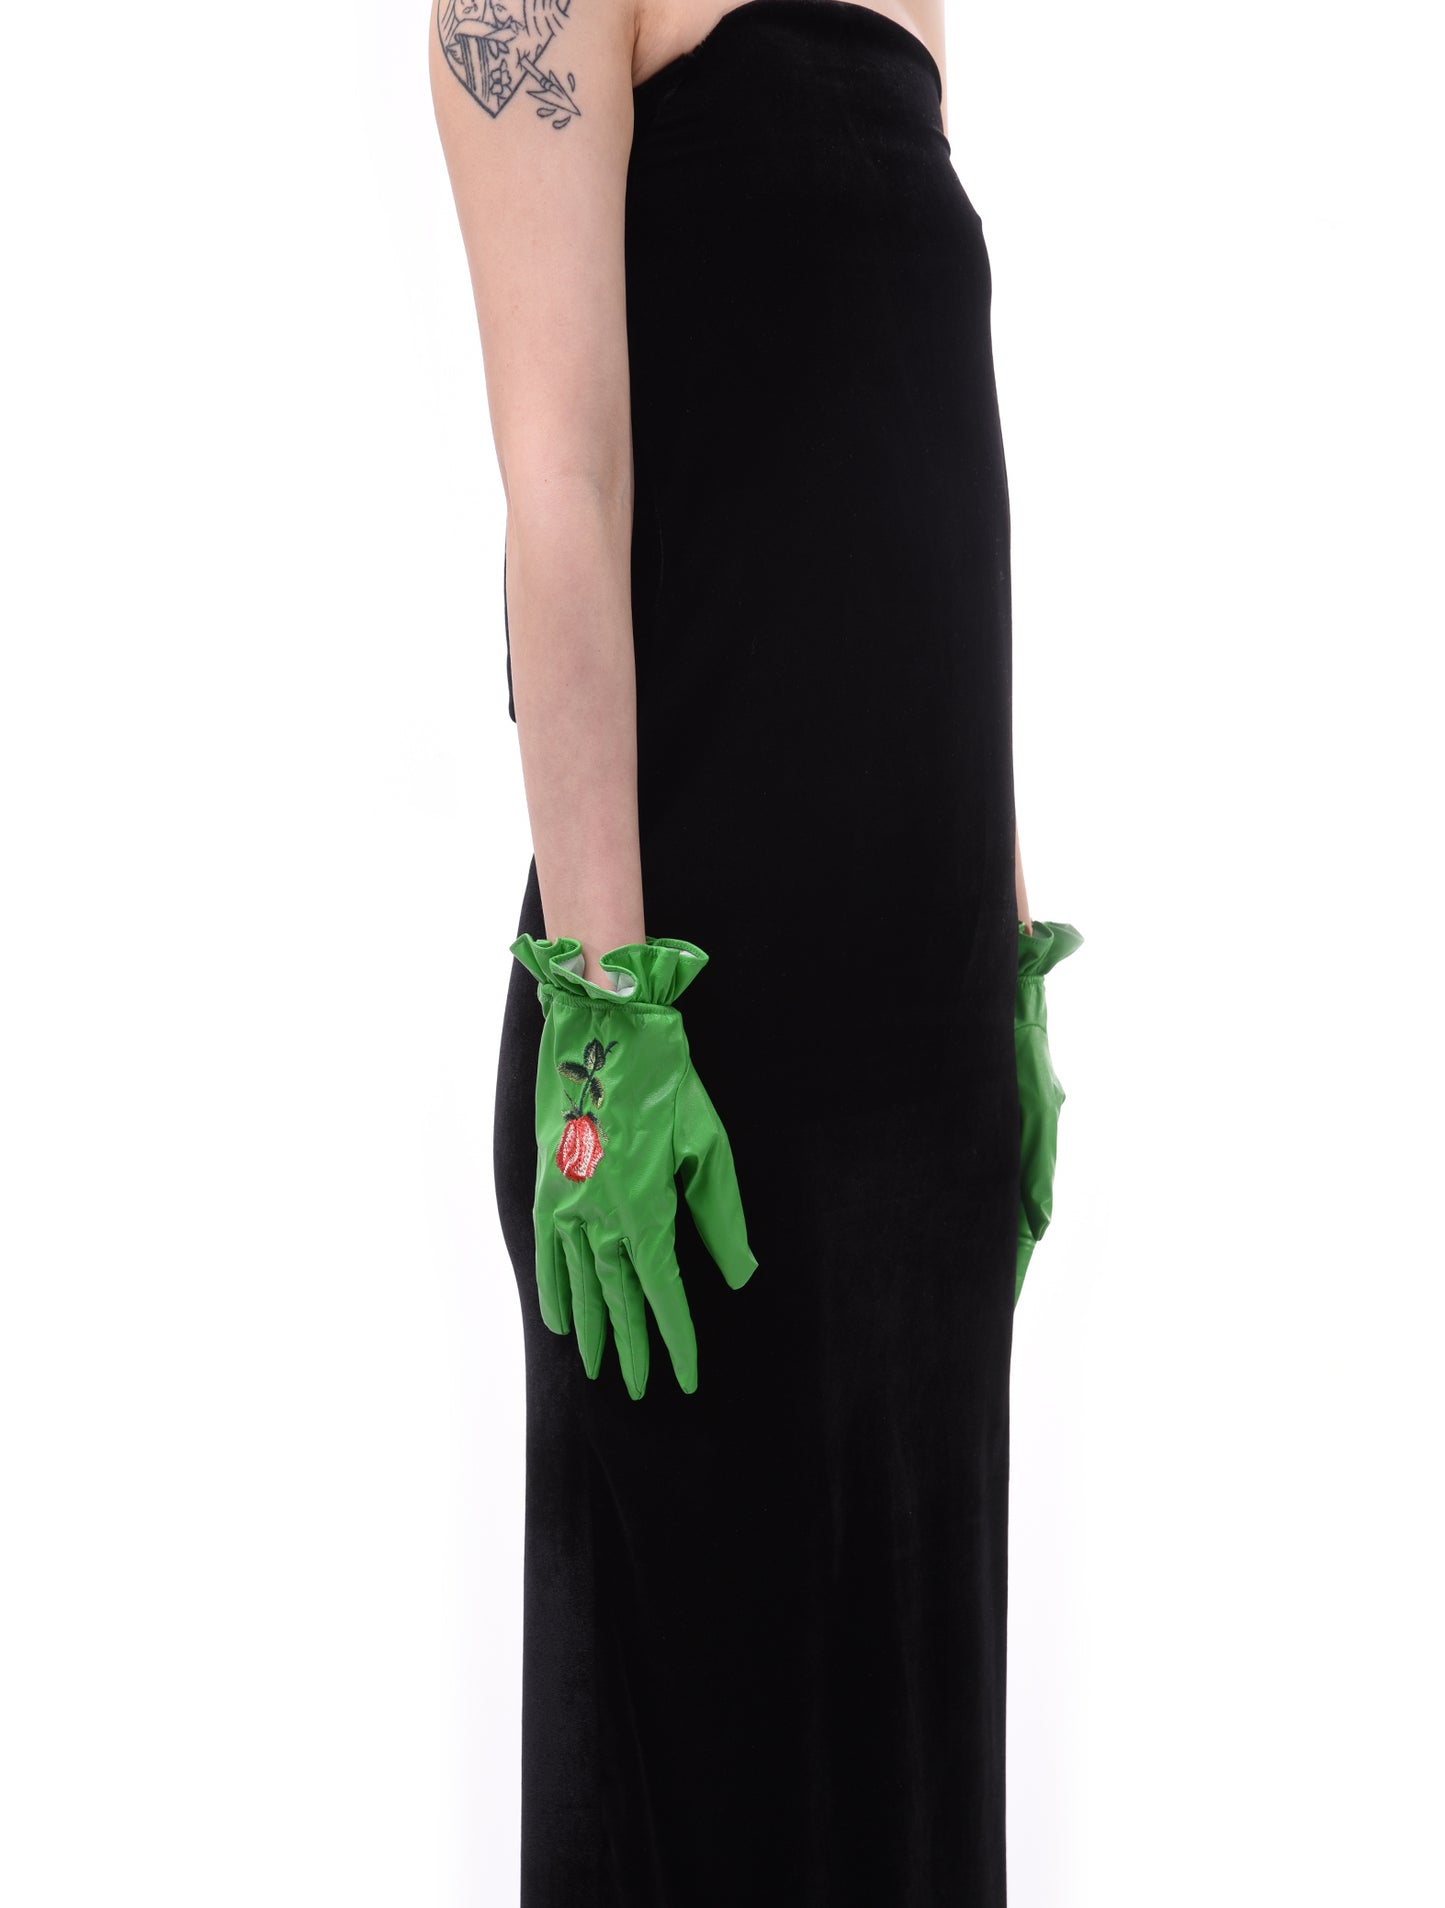 Yuhan Wang Rose Embroidered Green Gloves